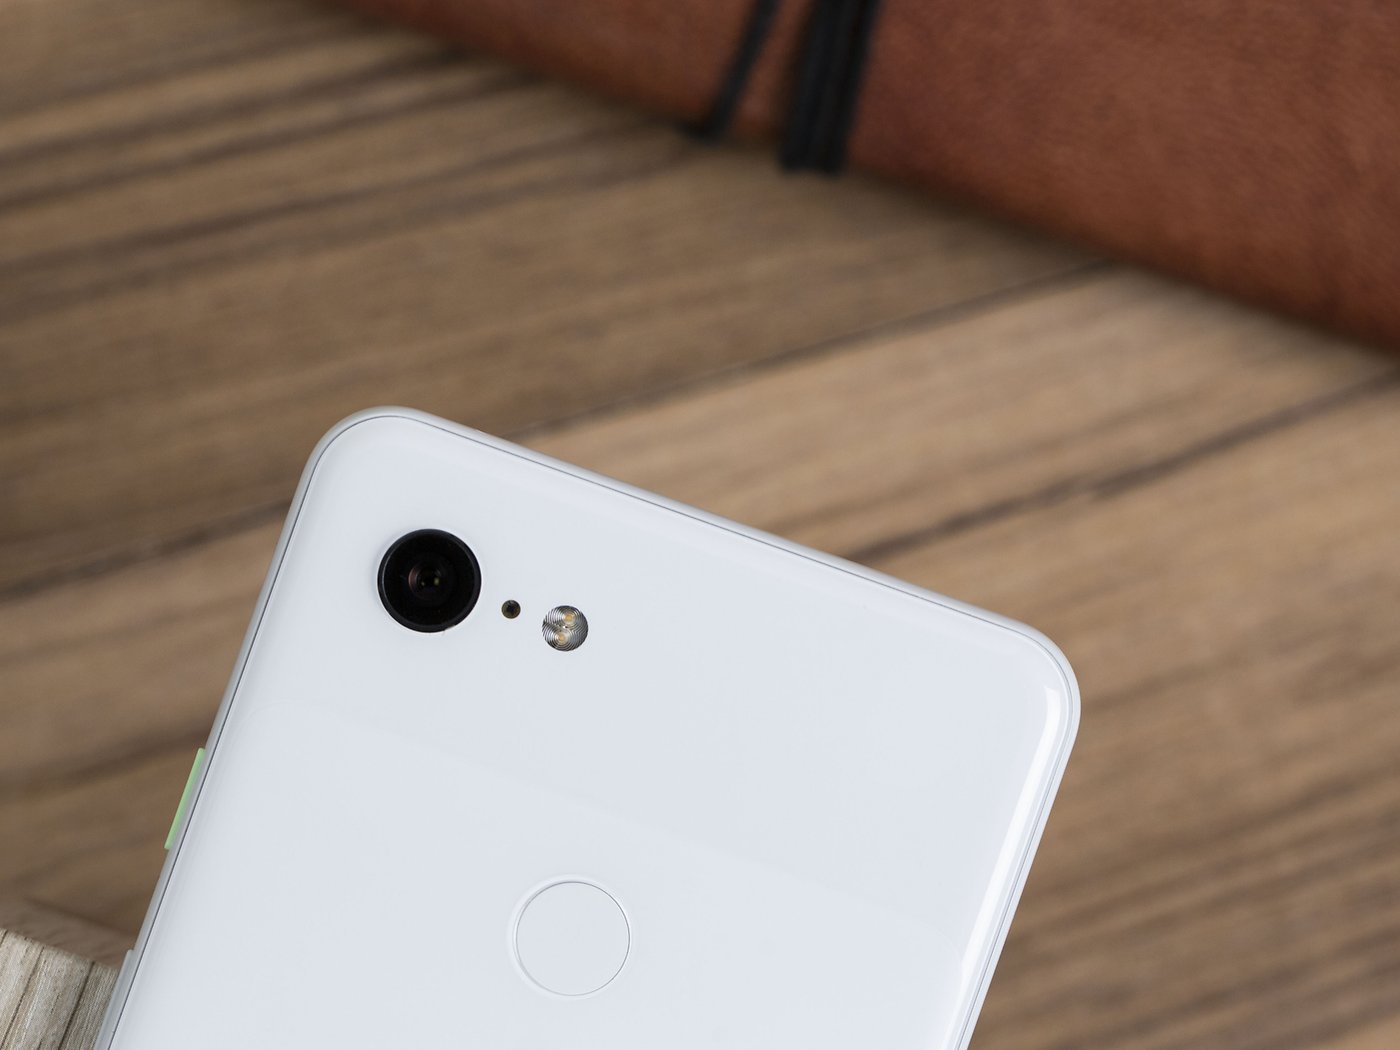 Gorgeous Google Pixel 3 wallpapers leak download here  9to5Google